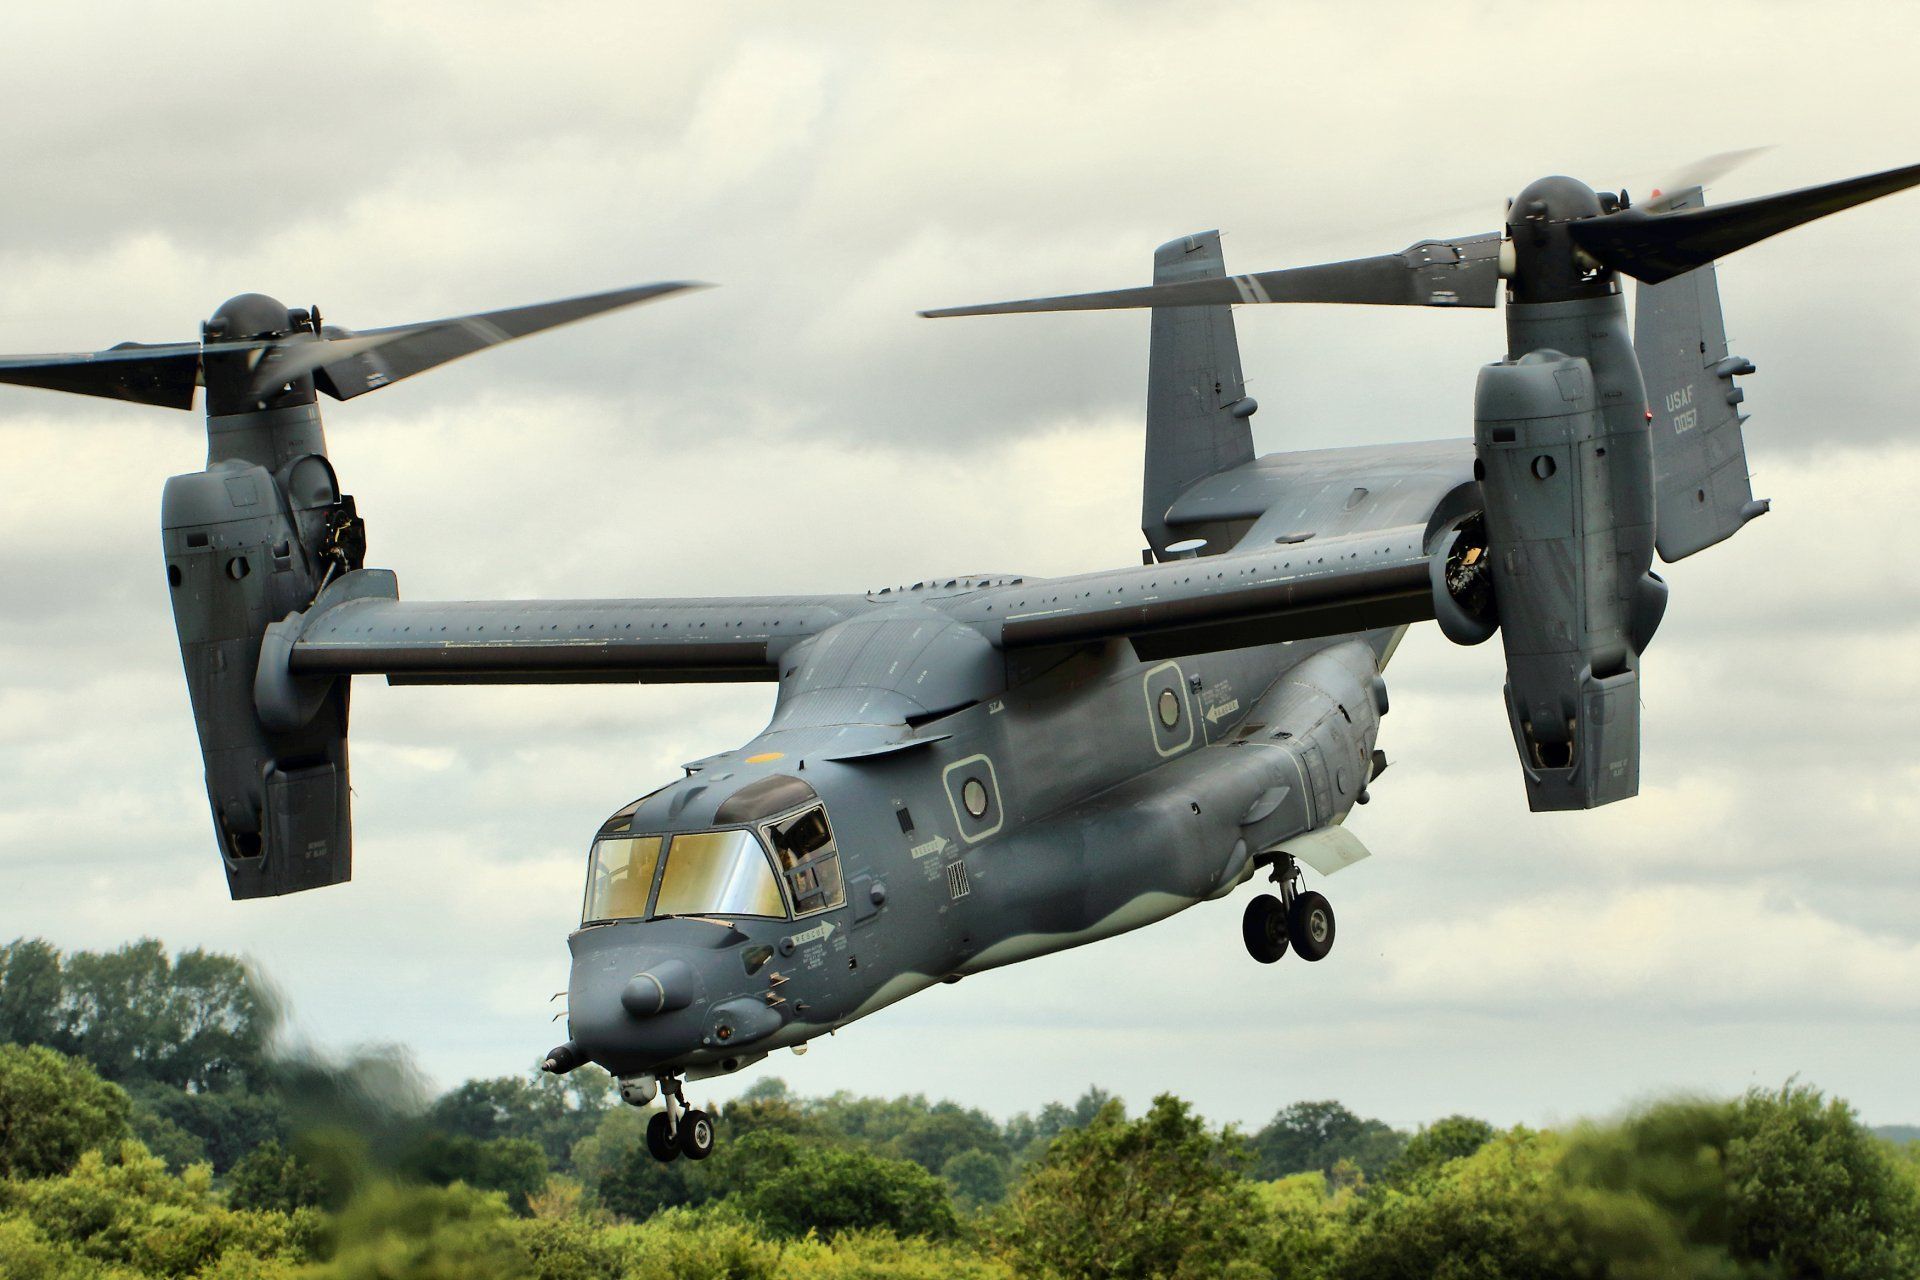 Cv 22 Osprey Transport Tiltrotor HD Wallpaper For Computer Or Android Device. Military Aircraft, Osprey Aircraft, Fighter Jets